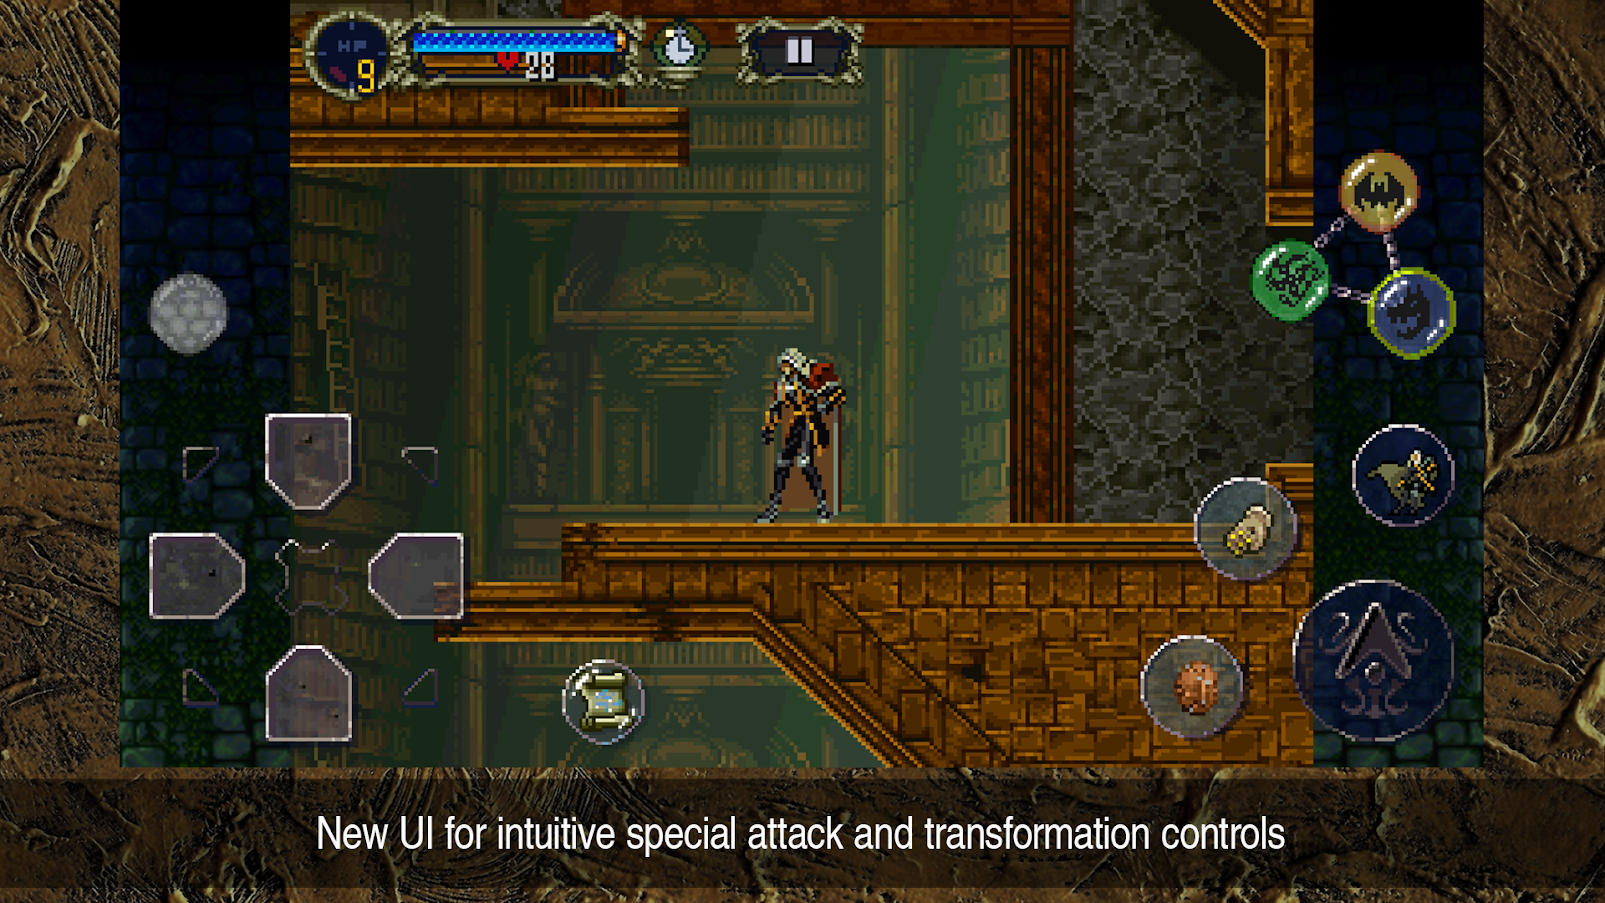 castlevania on android with touch control display